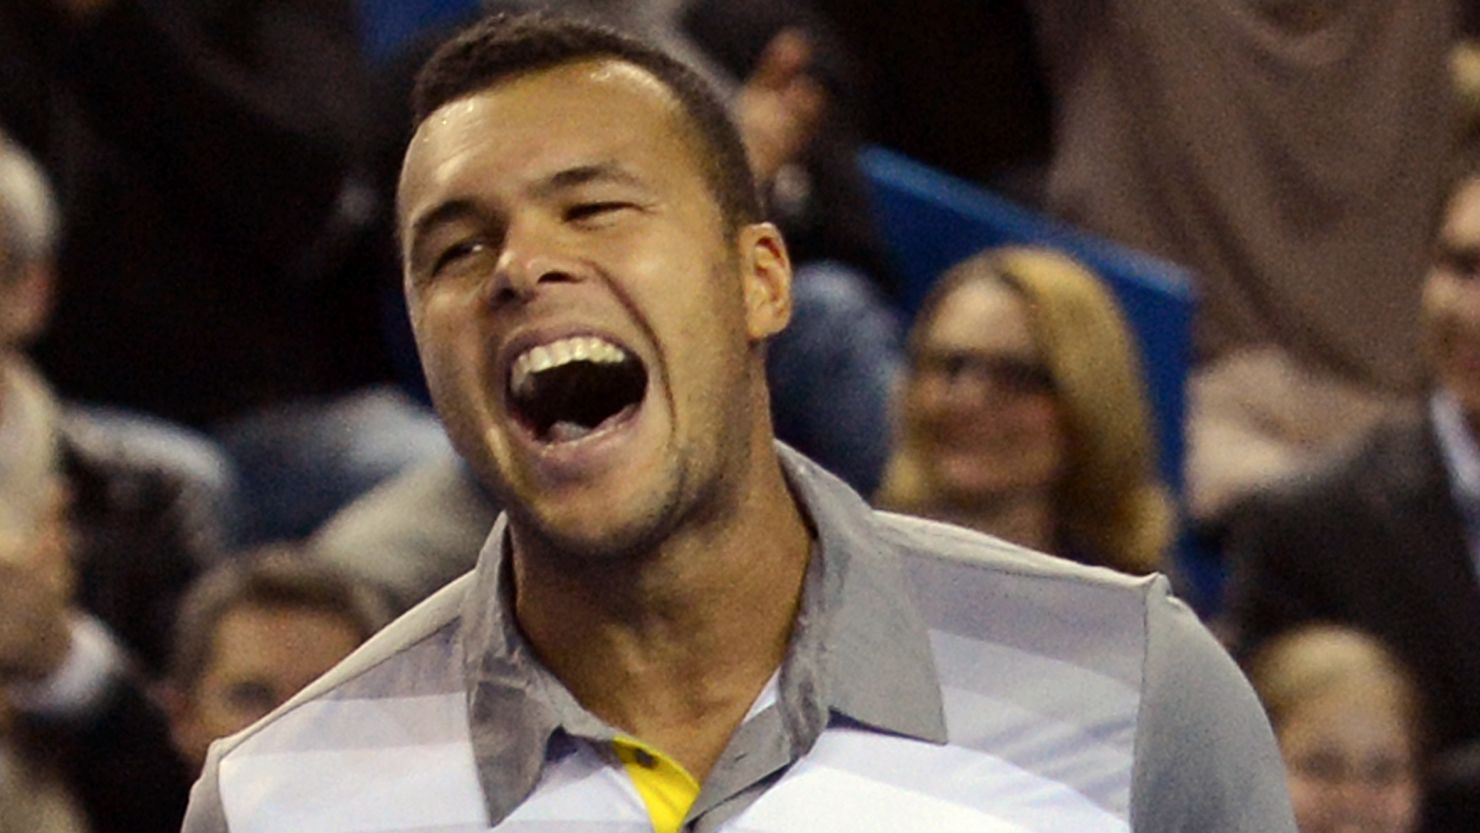 Jo-Wilfried Tsonga celebrates after closing out Tomas Berdych to win the Marseille Open title for the second time.